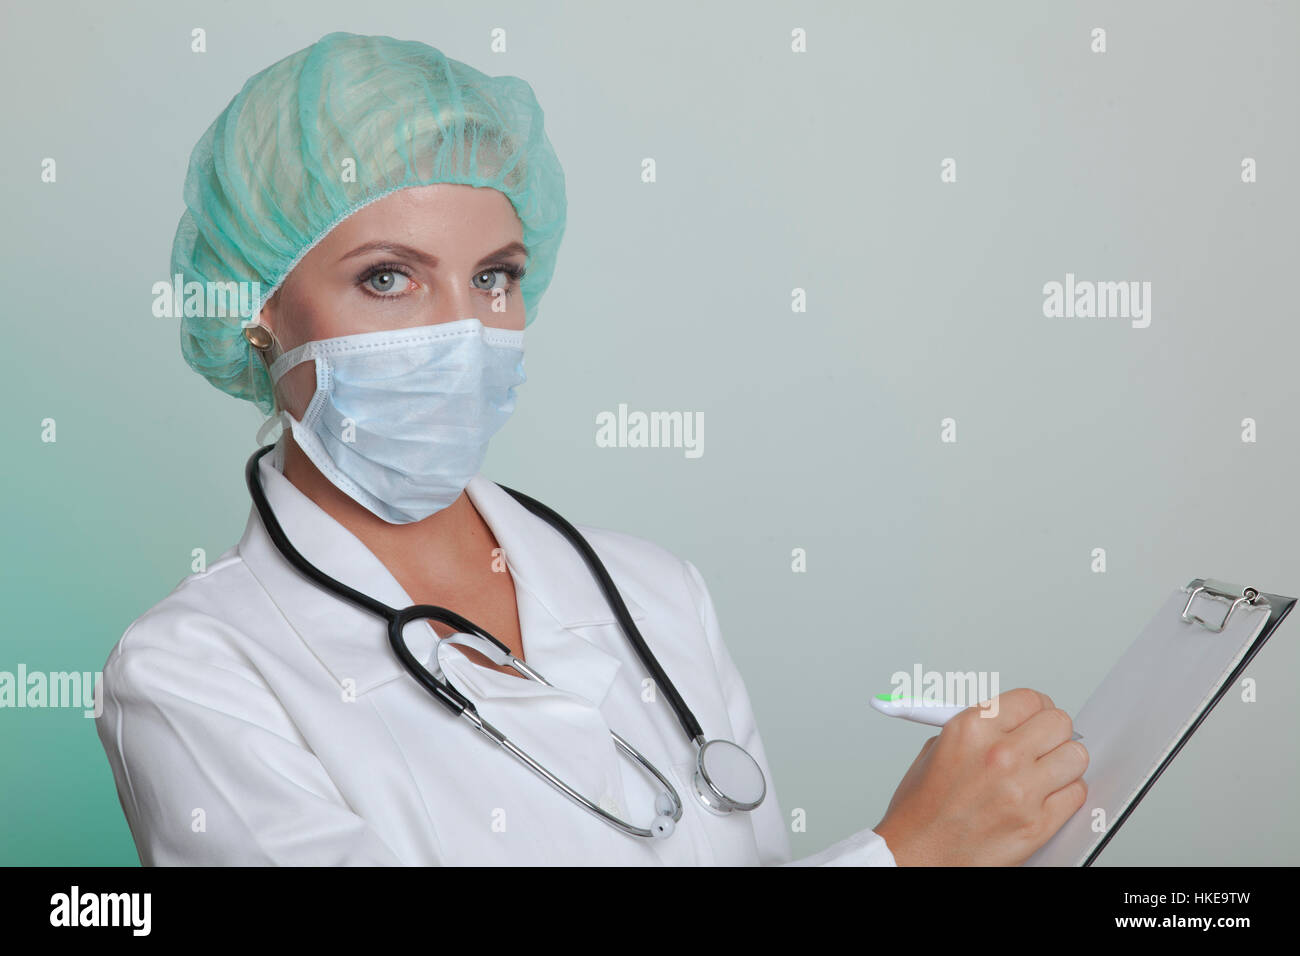 Female doctor in a white coat wearing hair bonnet and mouth guard